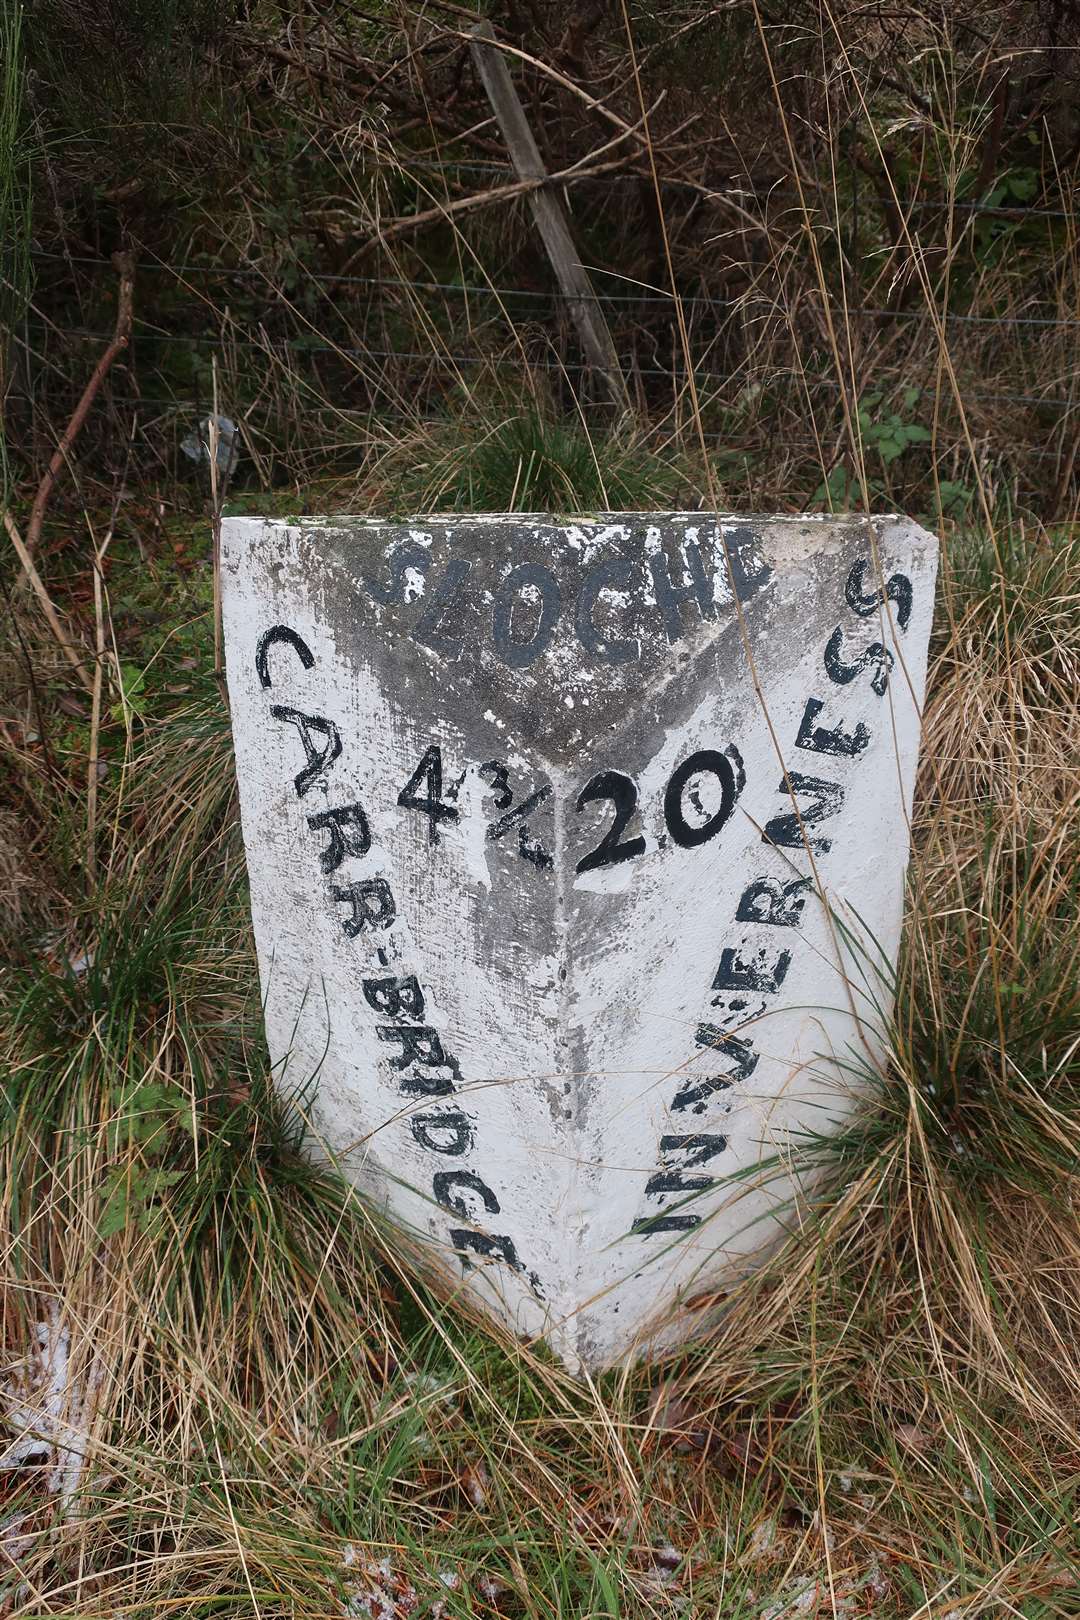 Mile marker on the road at Slochd.